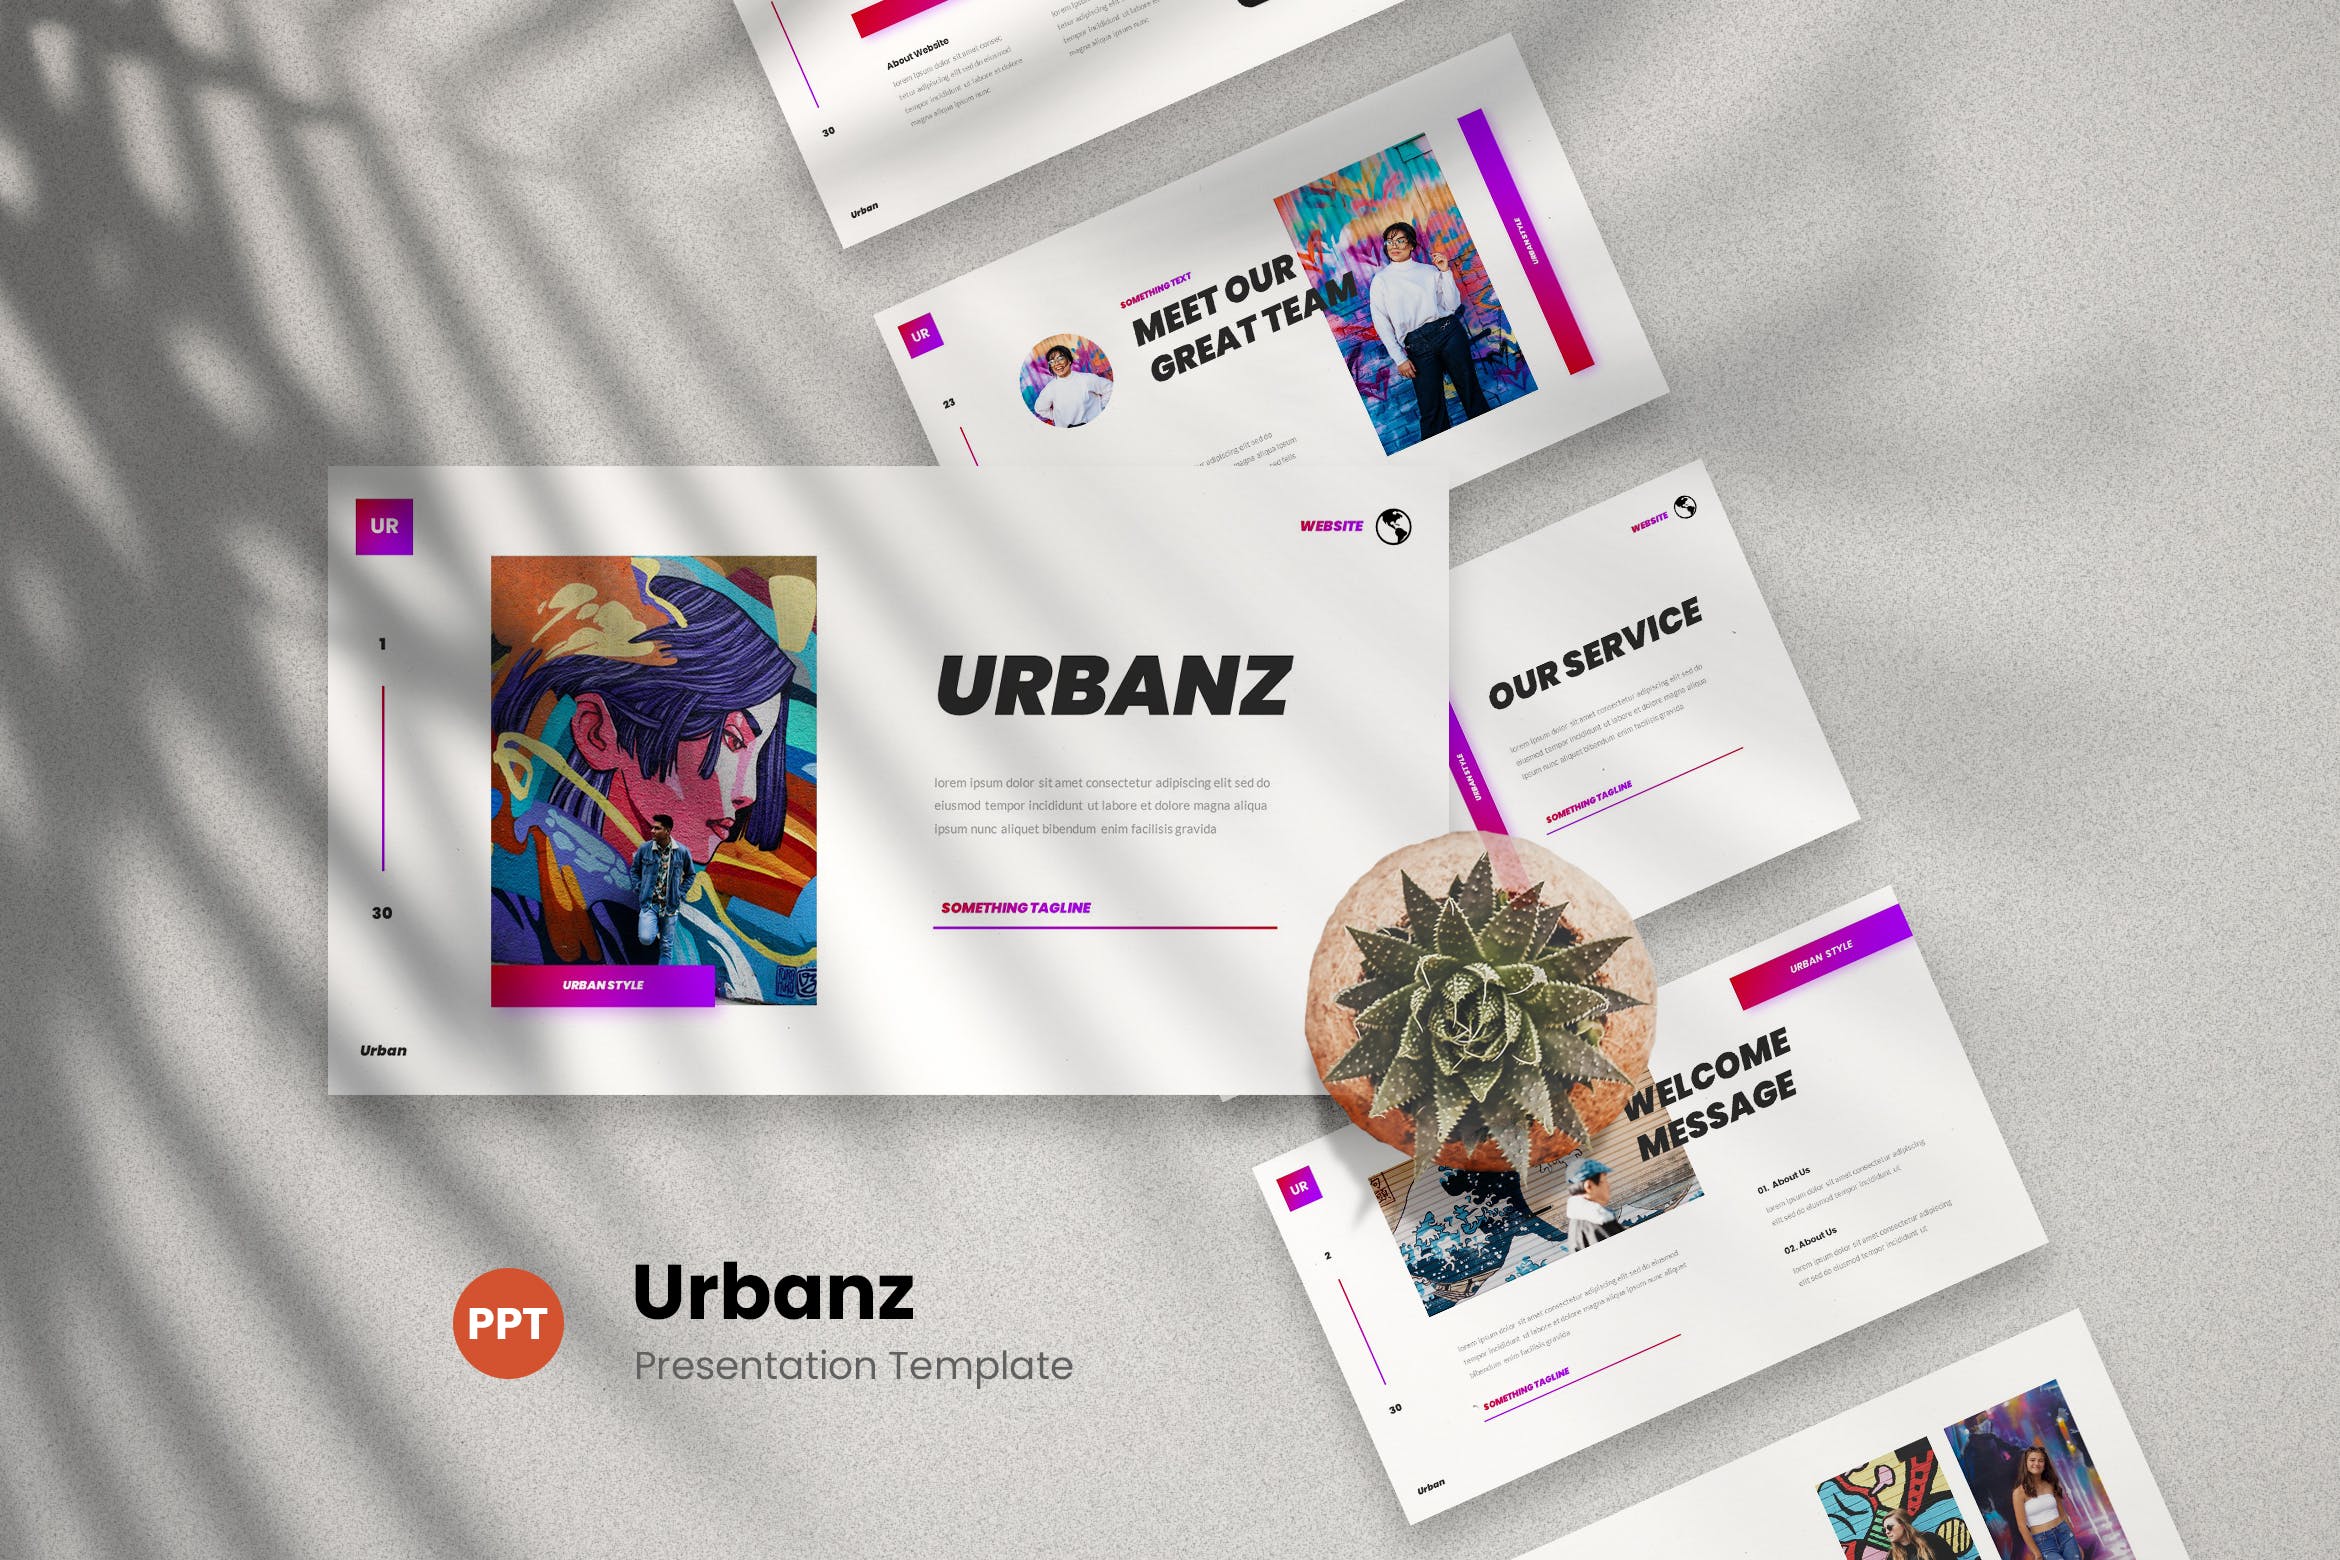 Cover image of Urban Graffiti Art PowerPoint Template.